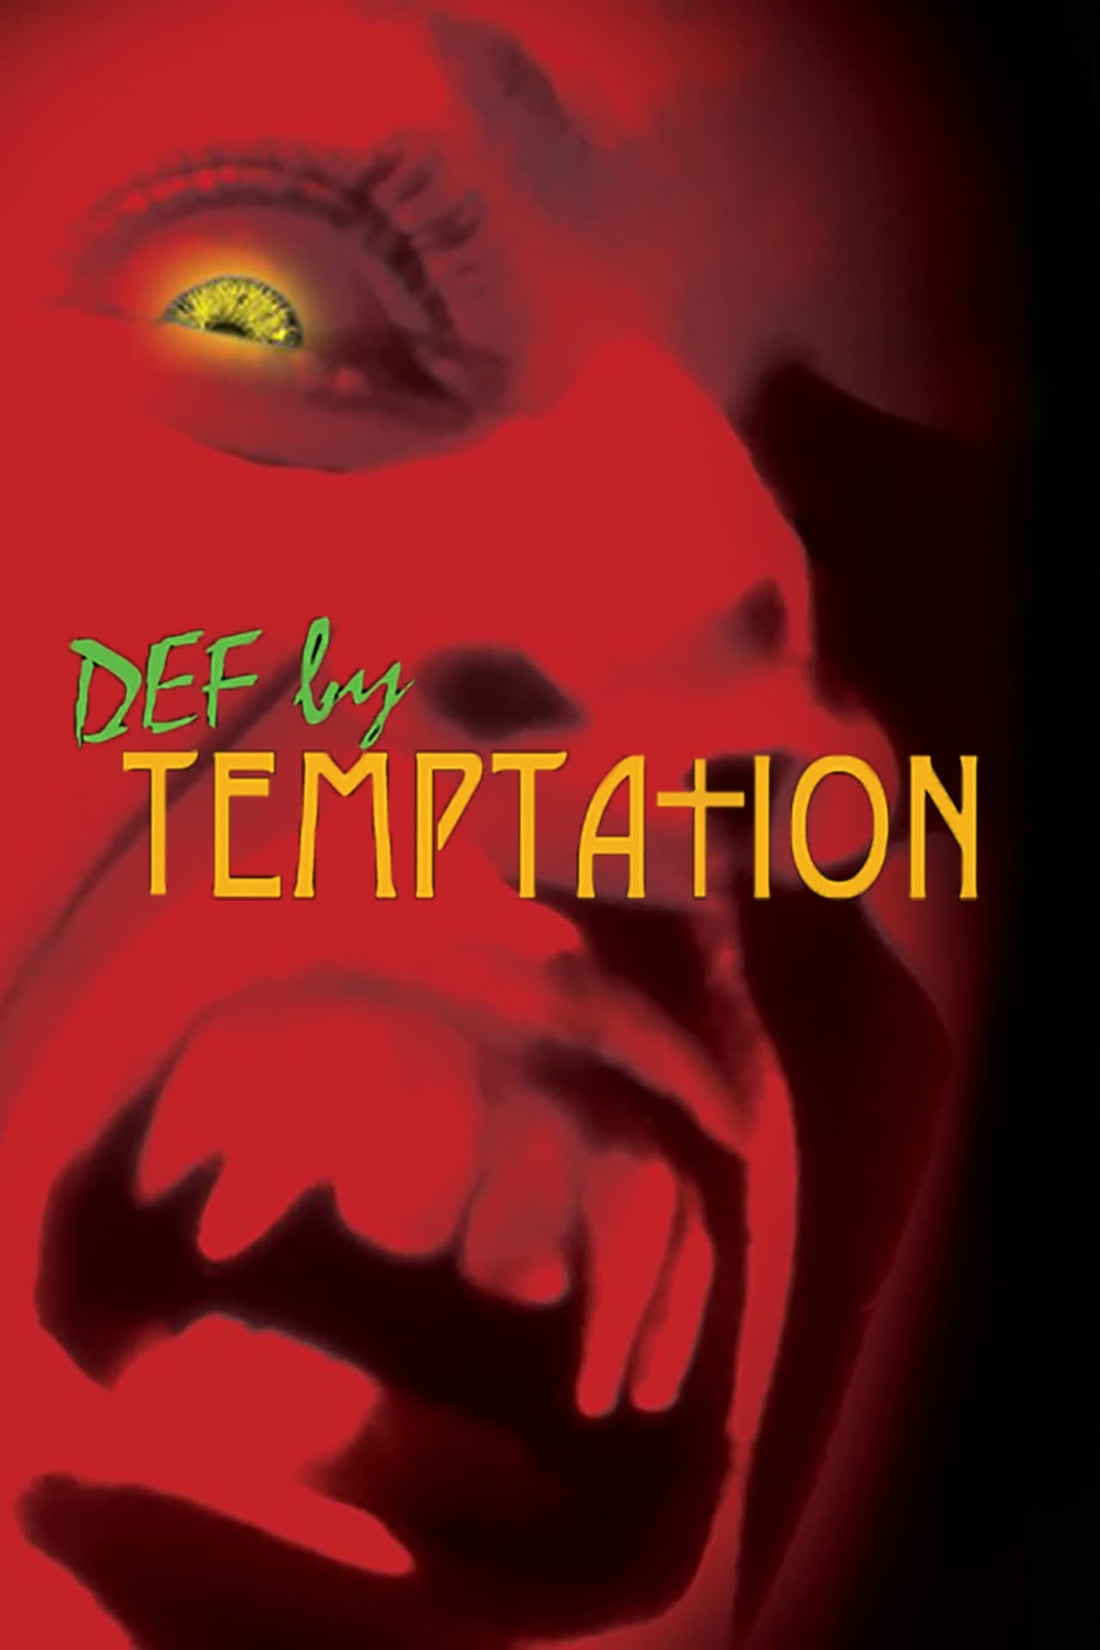 Where To Watch Def by Temptation 